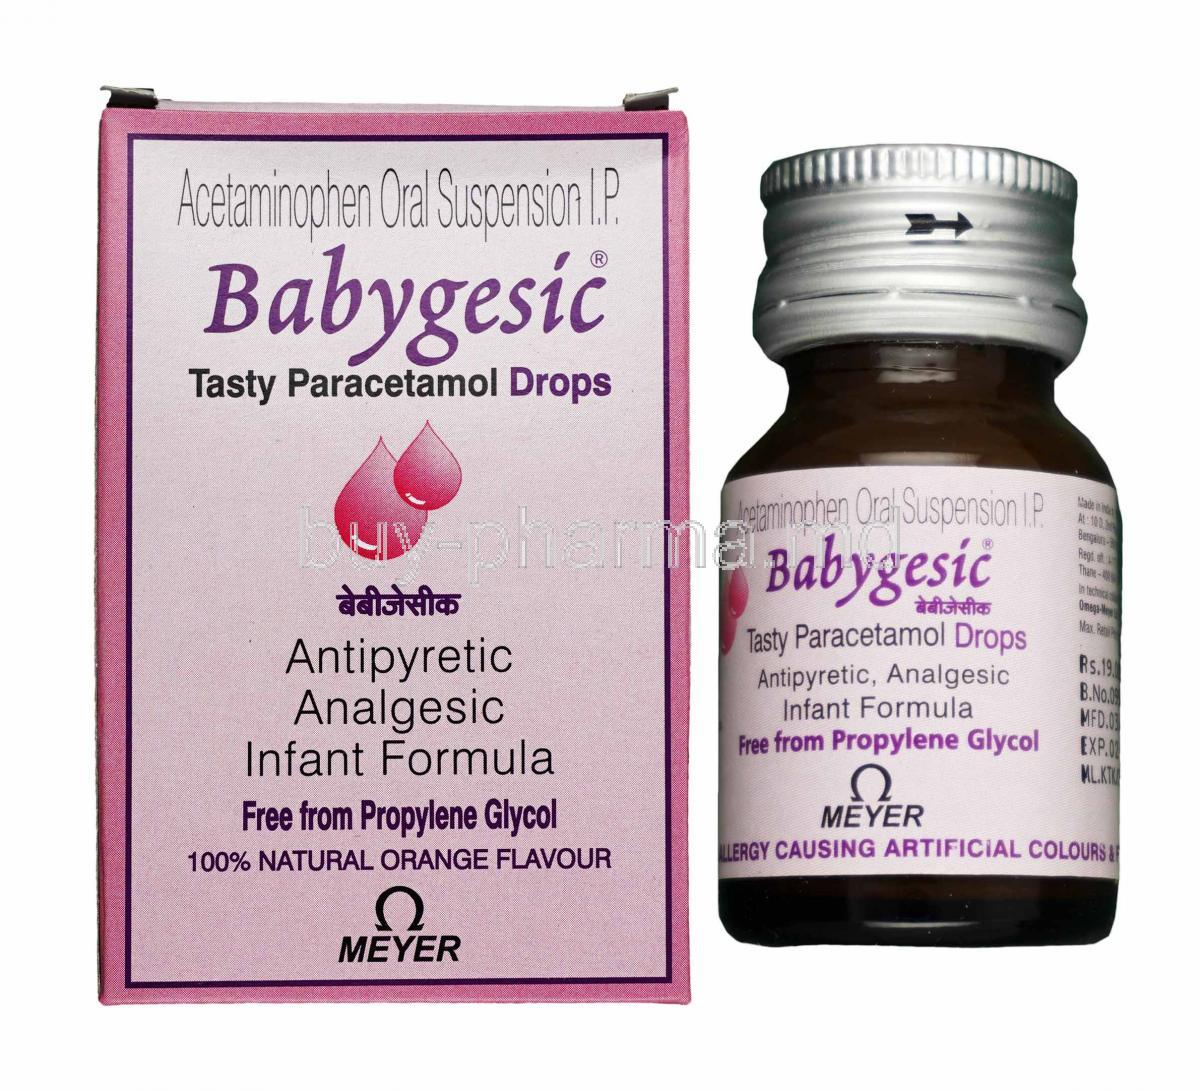 Babygesic drops box and bottle